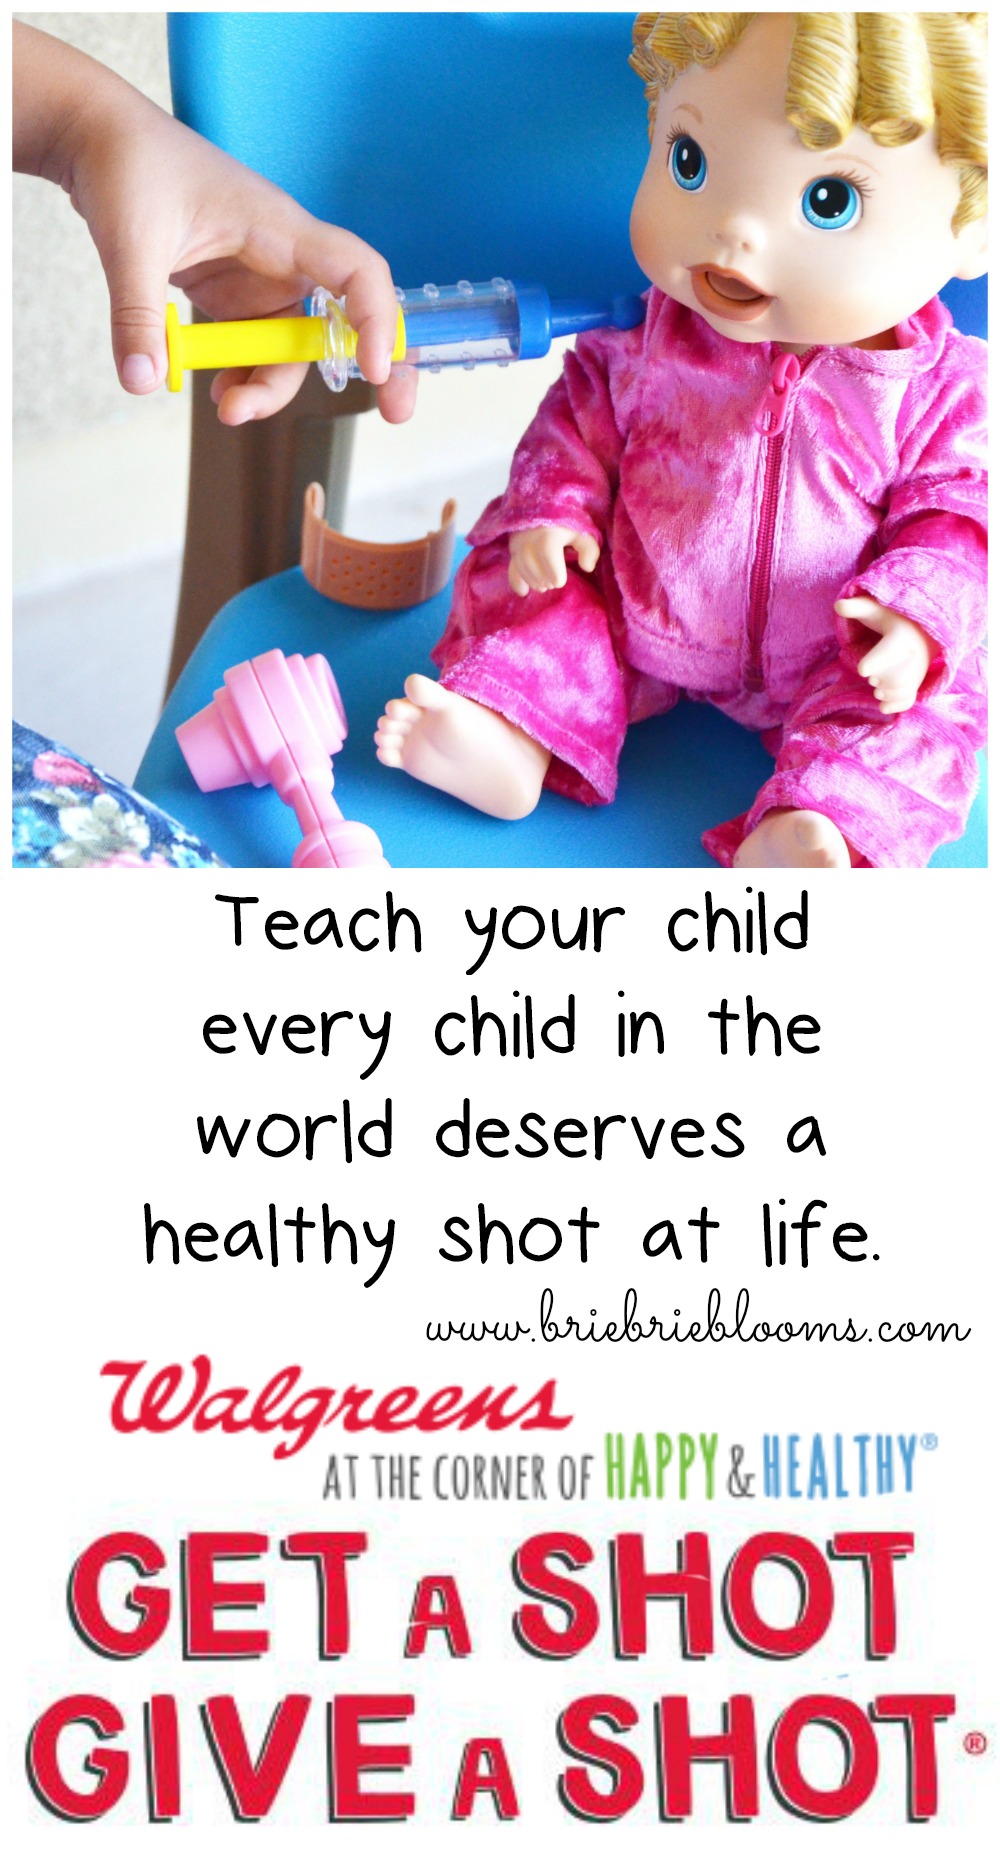 Every-child-in-the-world-deserves-a-healthy-shot@life